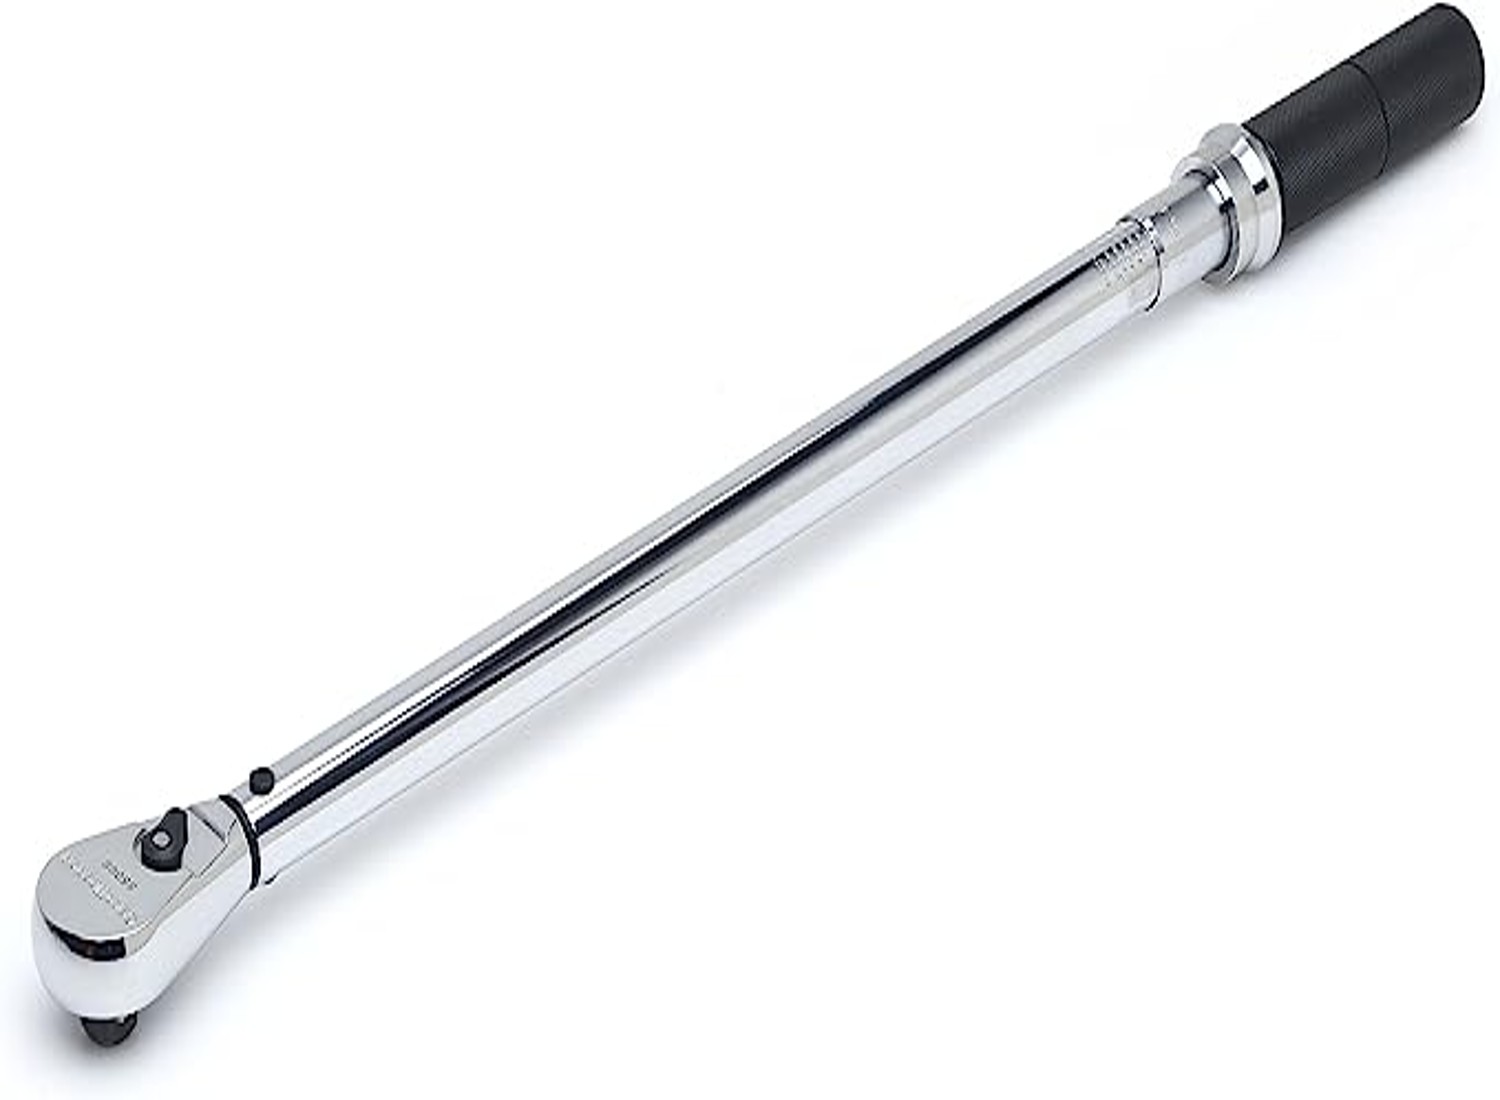 A thin silver torque wrench with a dark gray grip handle